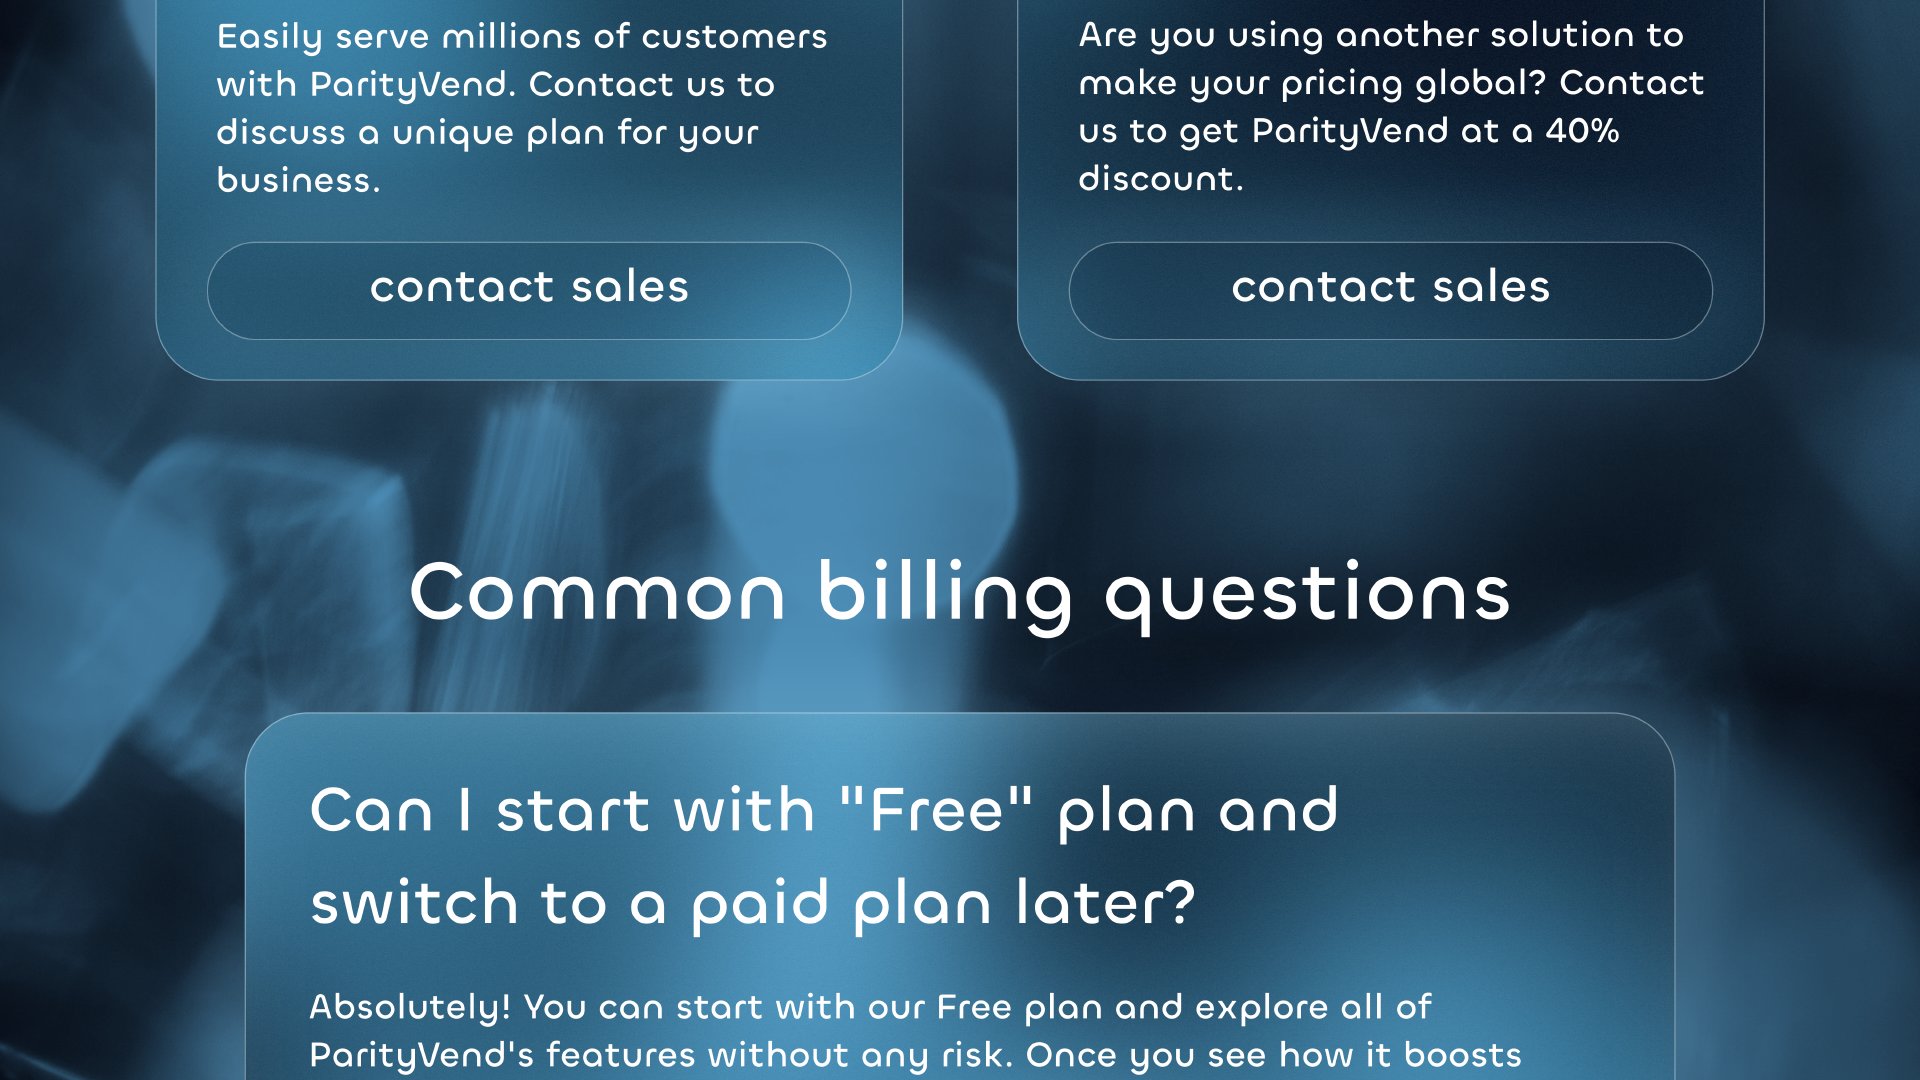 Common billing questions Can I start with 'Free' plan and switch to a paid plan later? Absolutely! You can start with our Free plan and explore all of ParityVend's features without any risk. Once you see how it boosts your sales and expands your reach, upgrading to a paid plan for even more power is just a click away. It's flexible and easy, so you can scale seamlessly as your business grows.